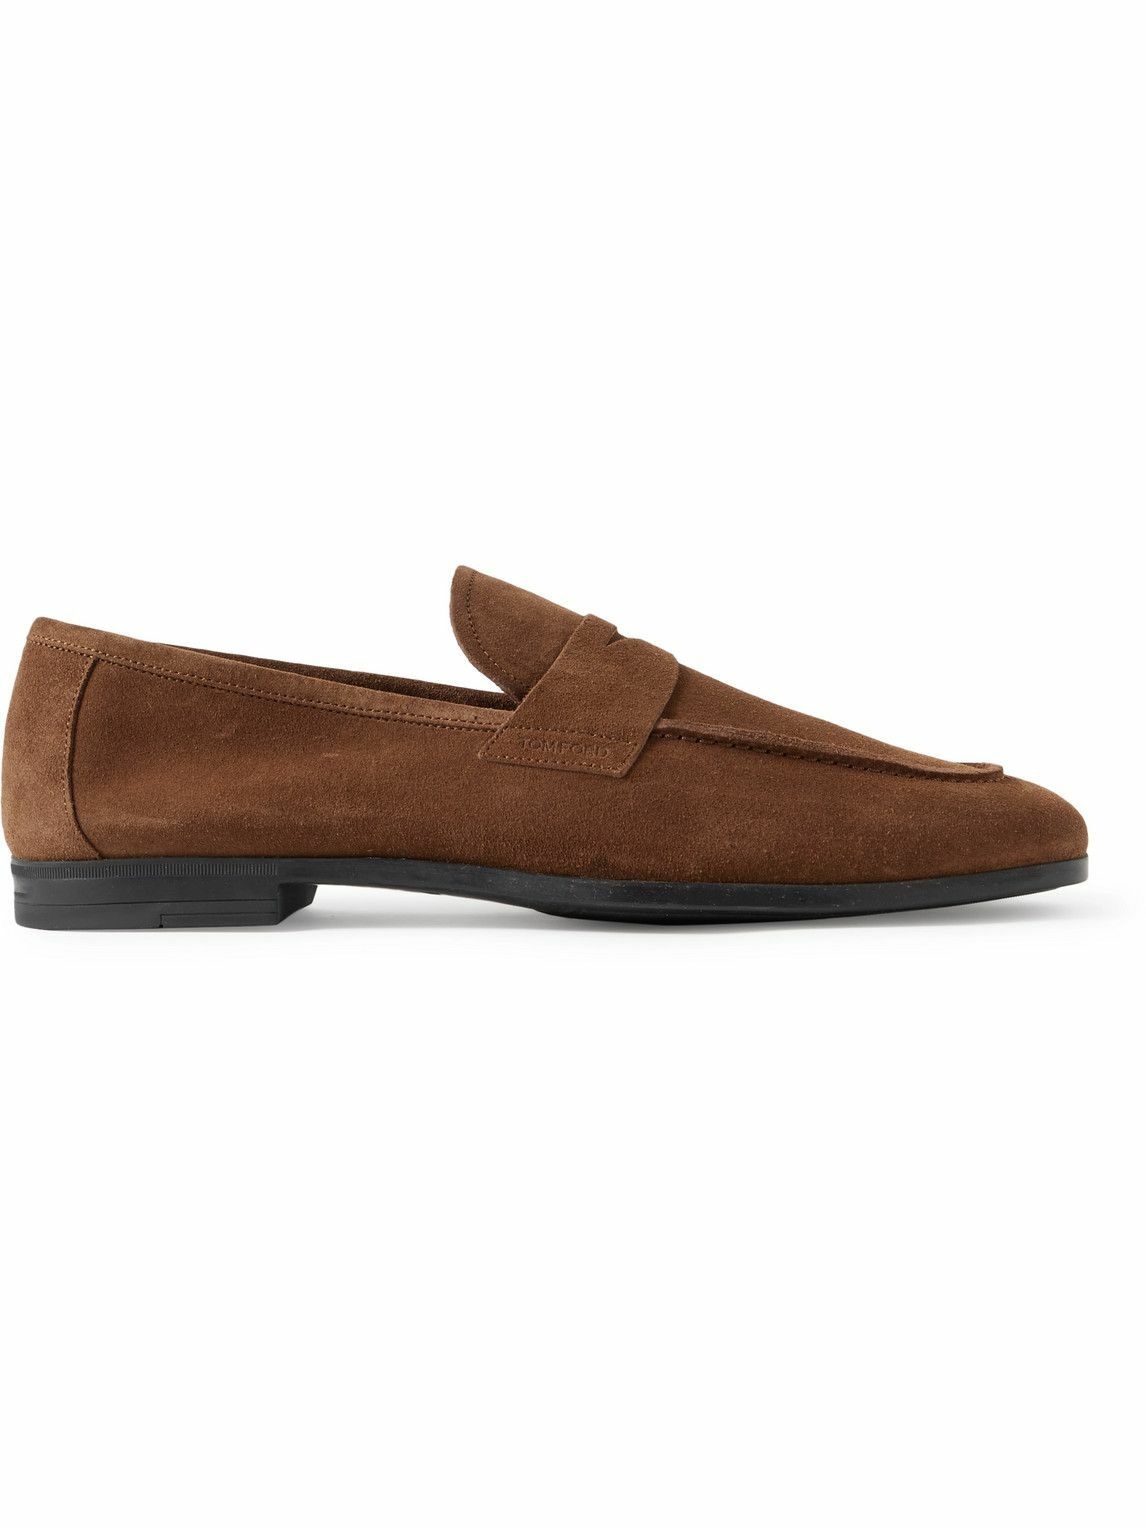 TOM FORD - Sean Suede Penny Loafers - Brown TOM FORD